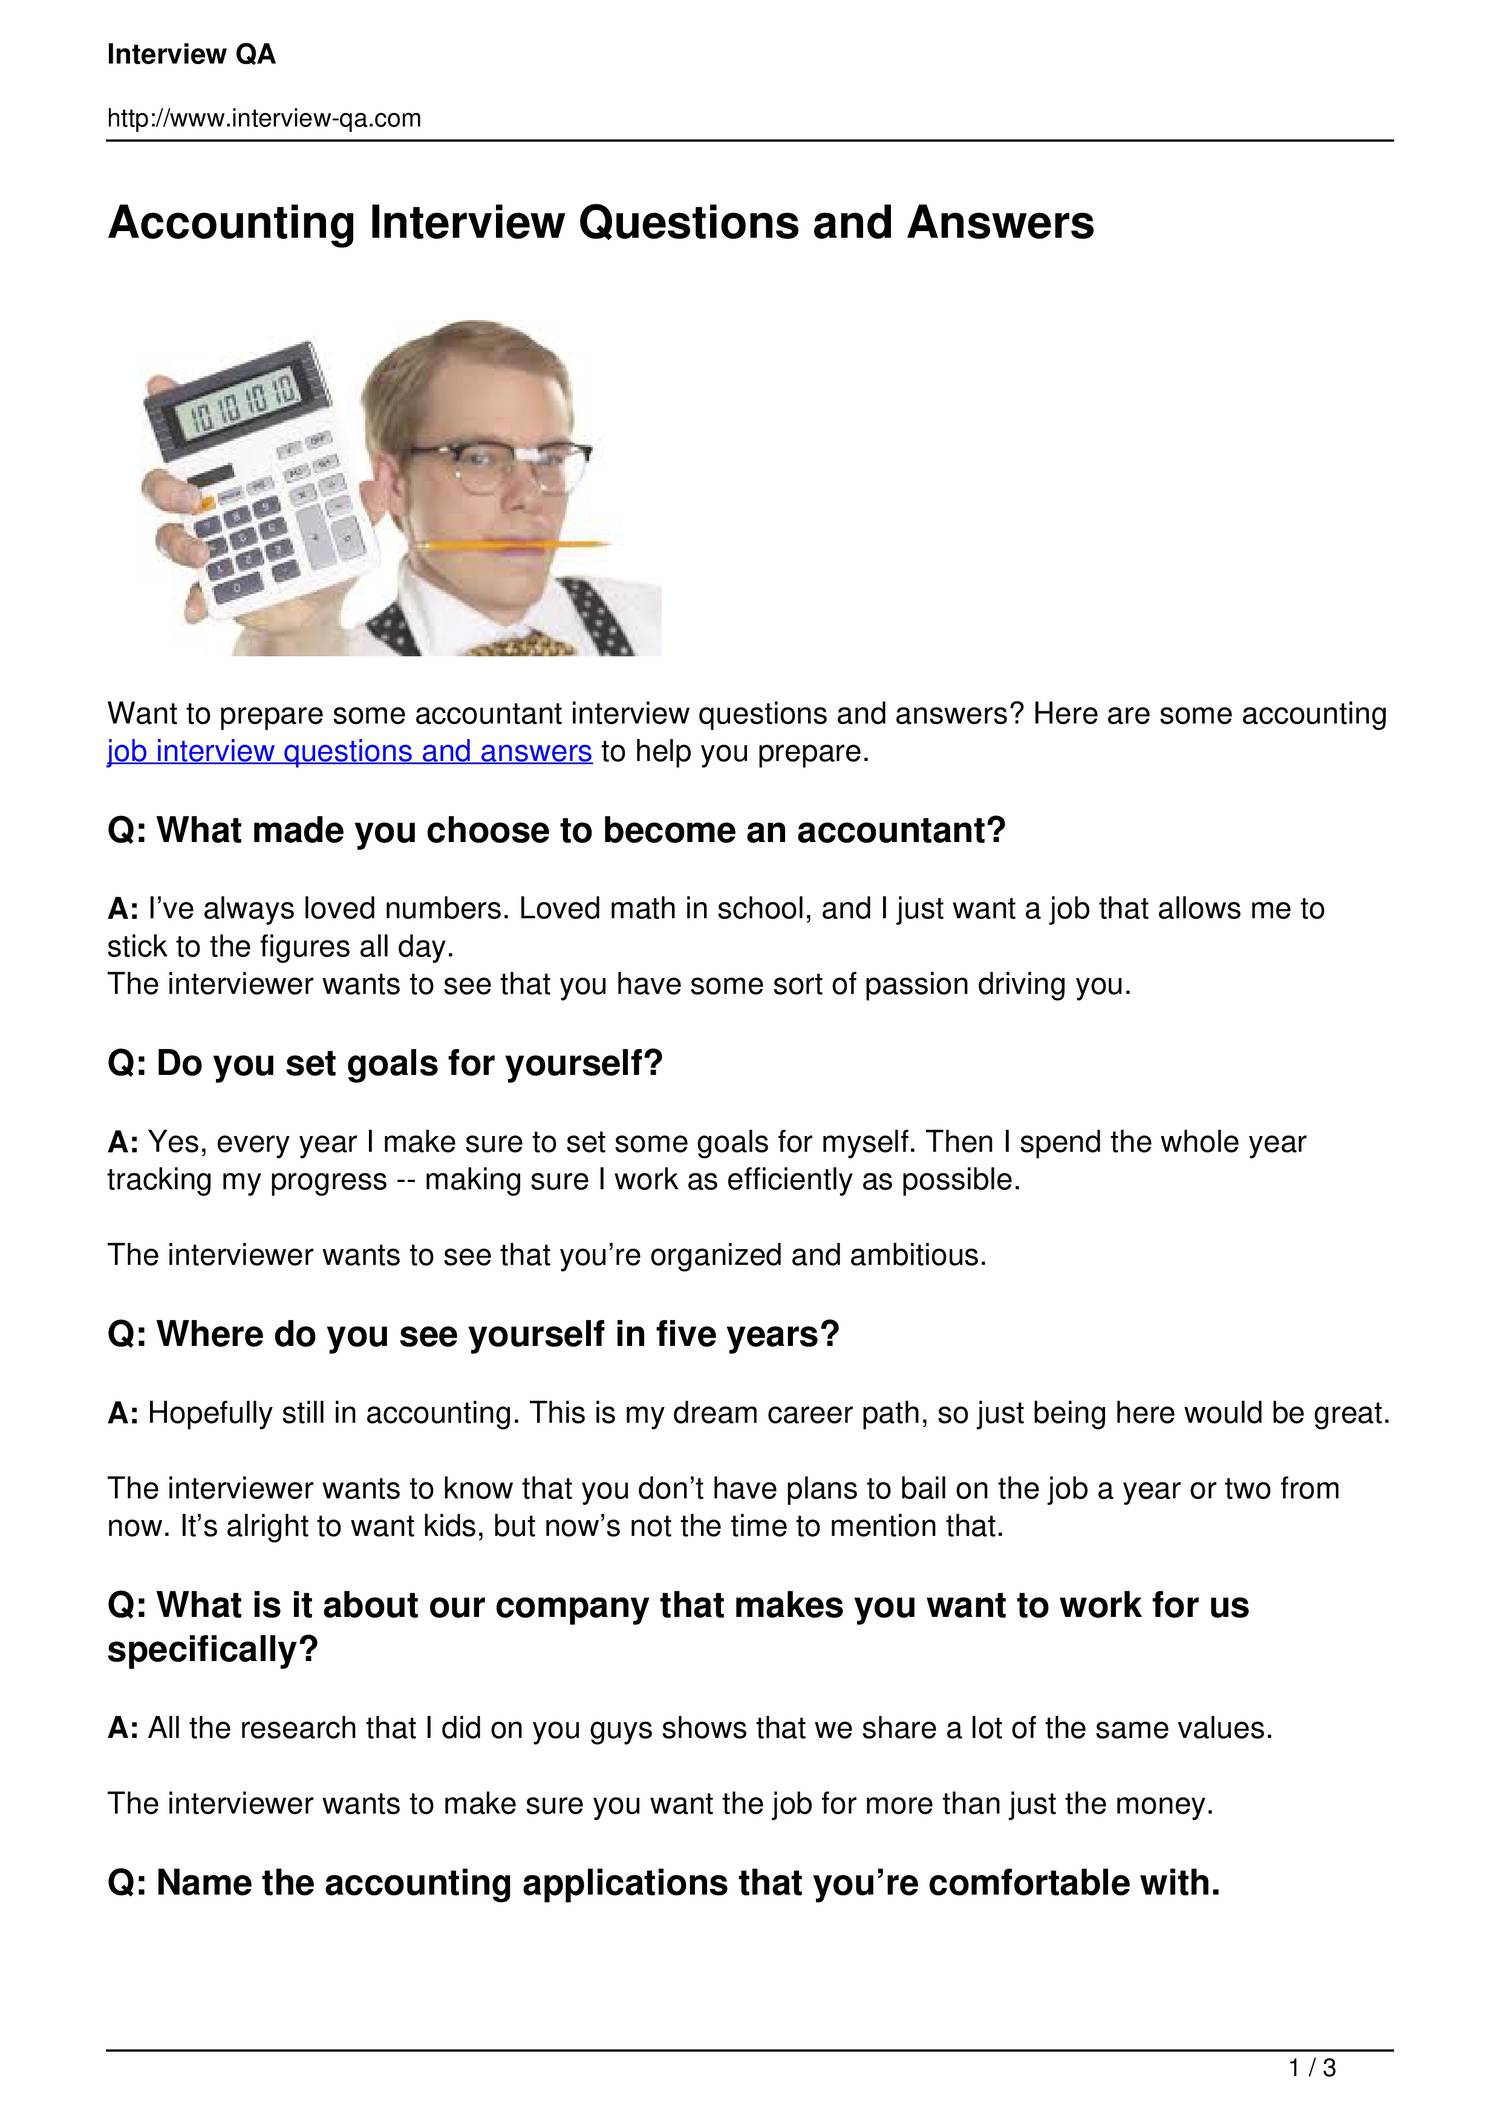 accounting-interview-questions-and-answers.pdf | DocDroid